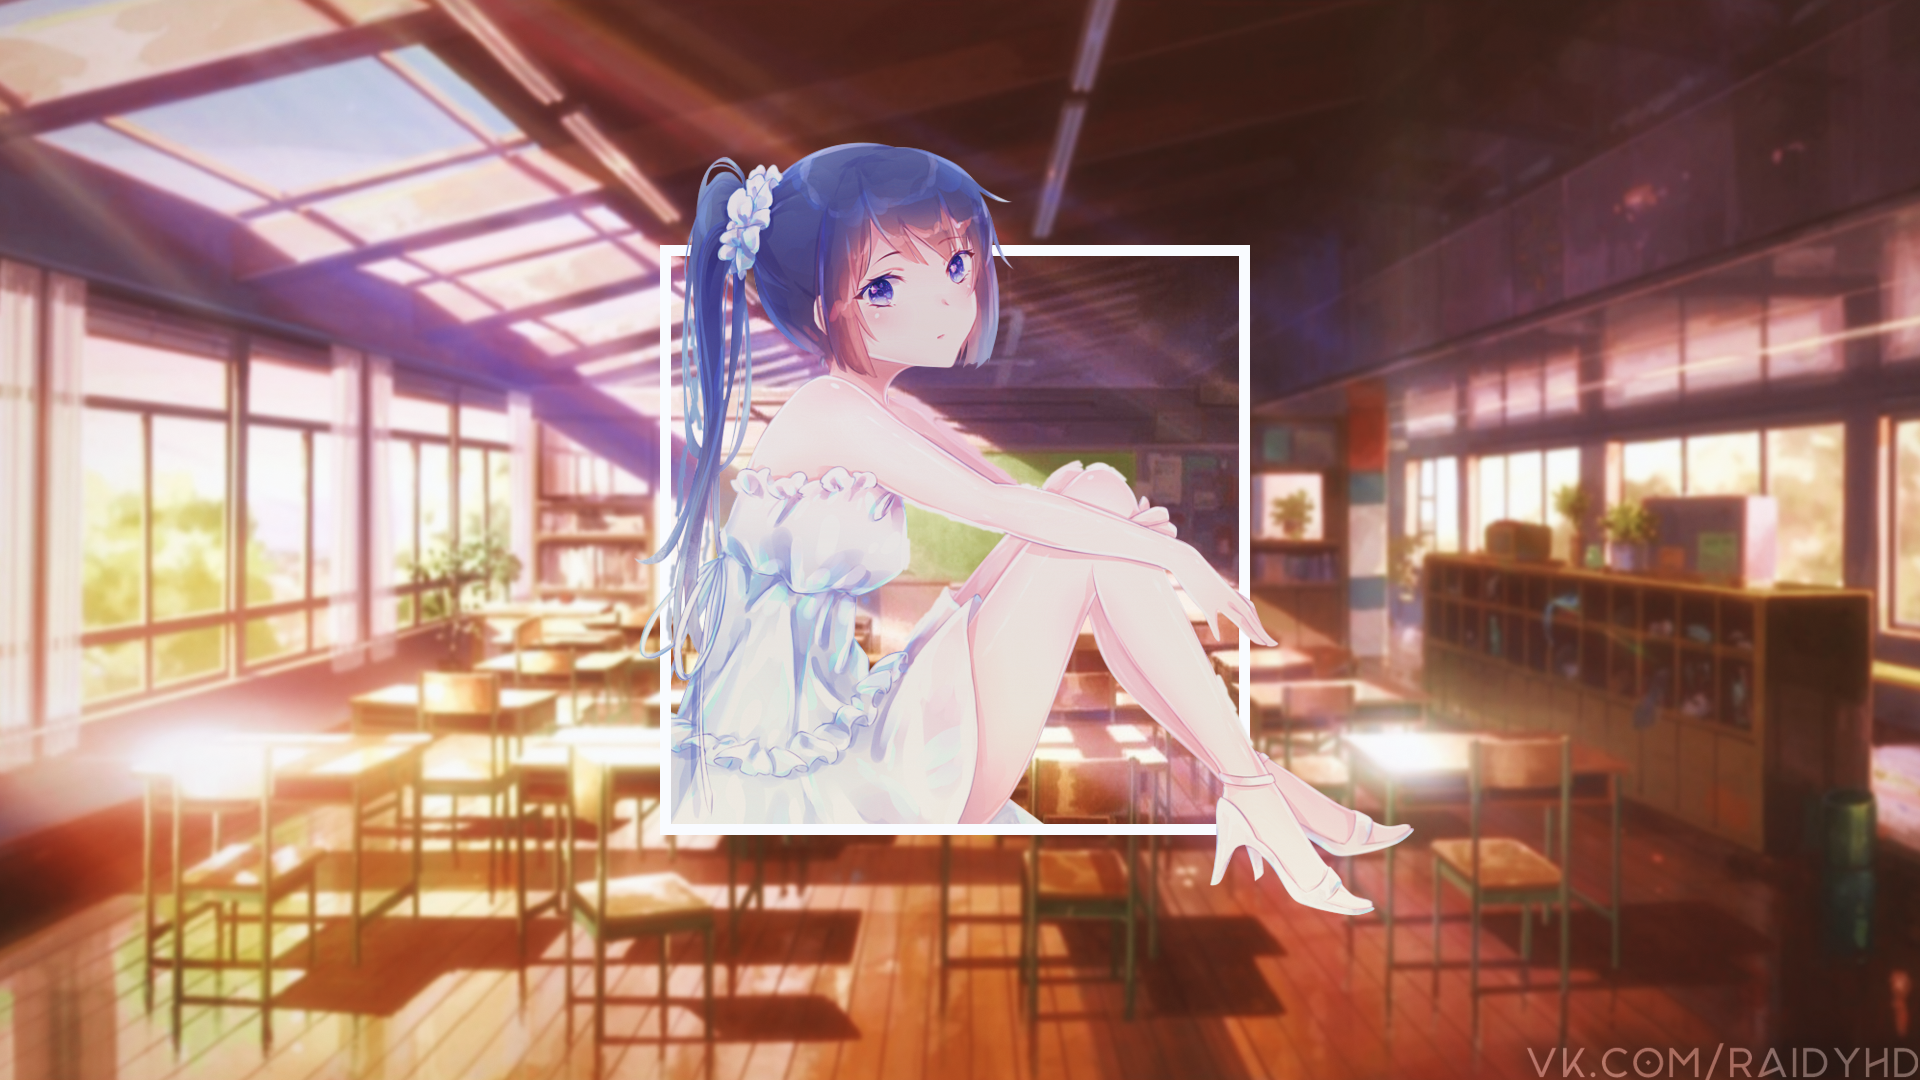 Anime 1920x1080 anime anime girls picture-in-picture